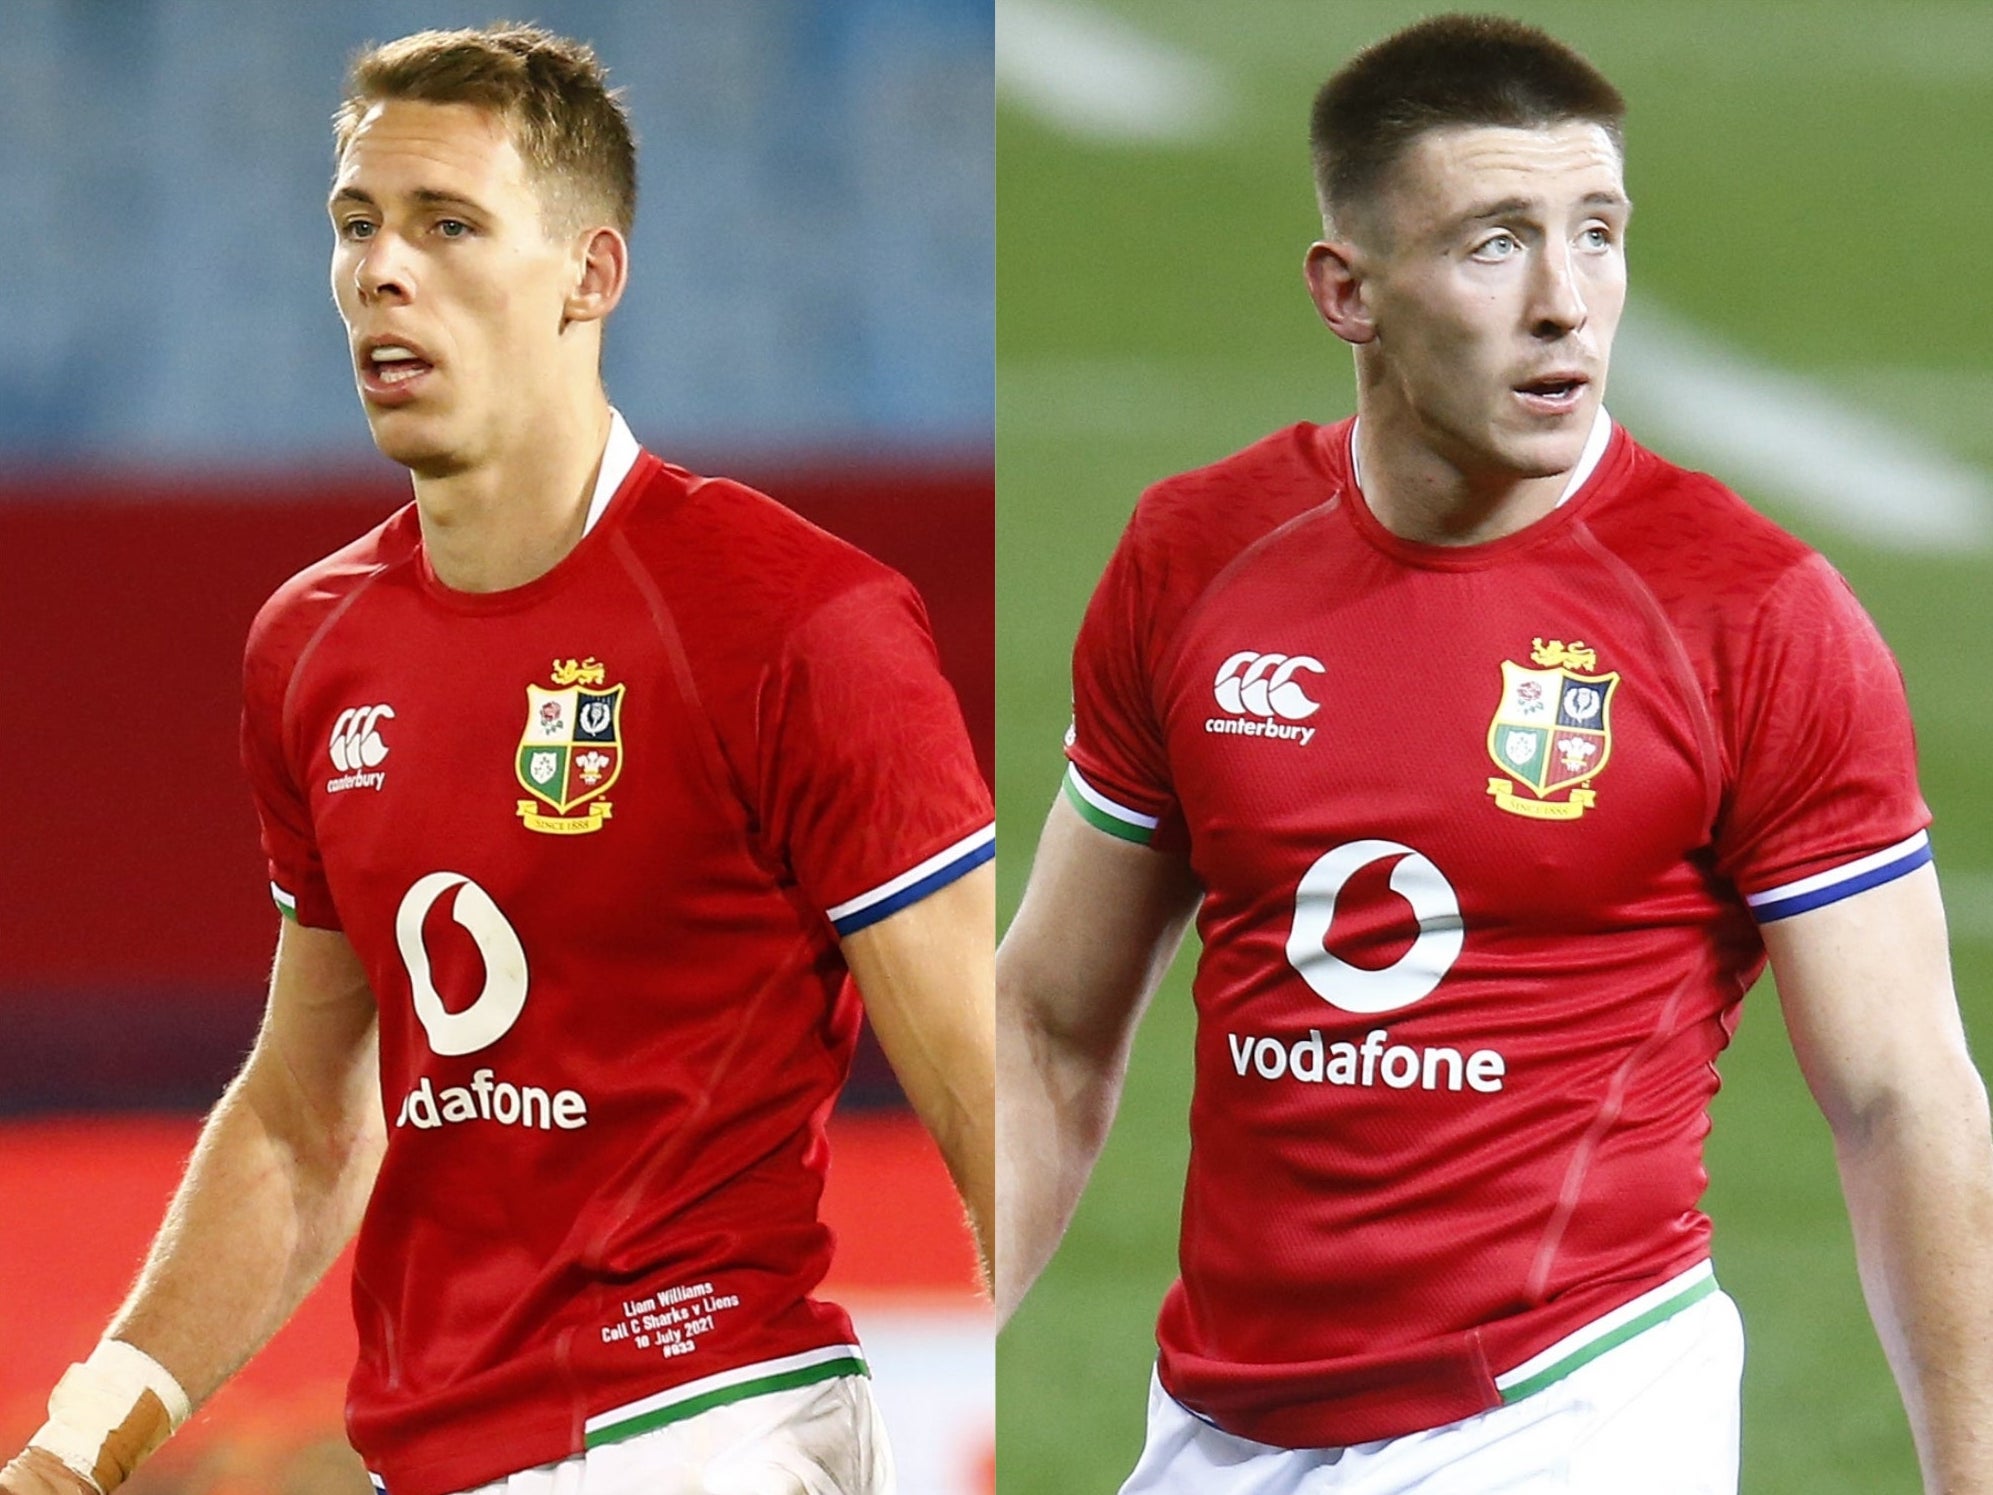 Liam Williams and Josh Adams will start for the Lions in Saturday’s series decider against South Africa